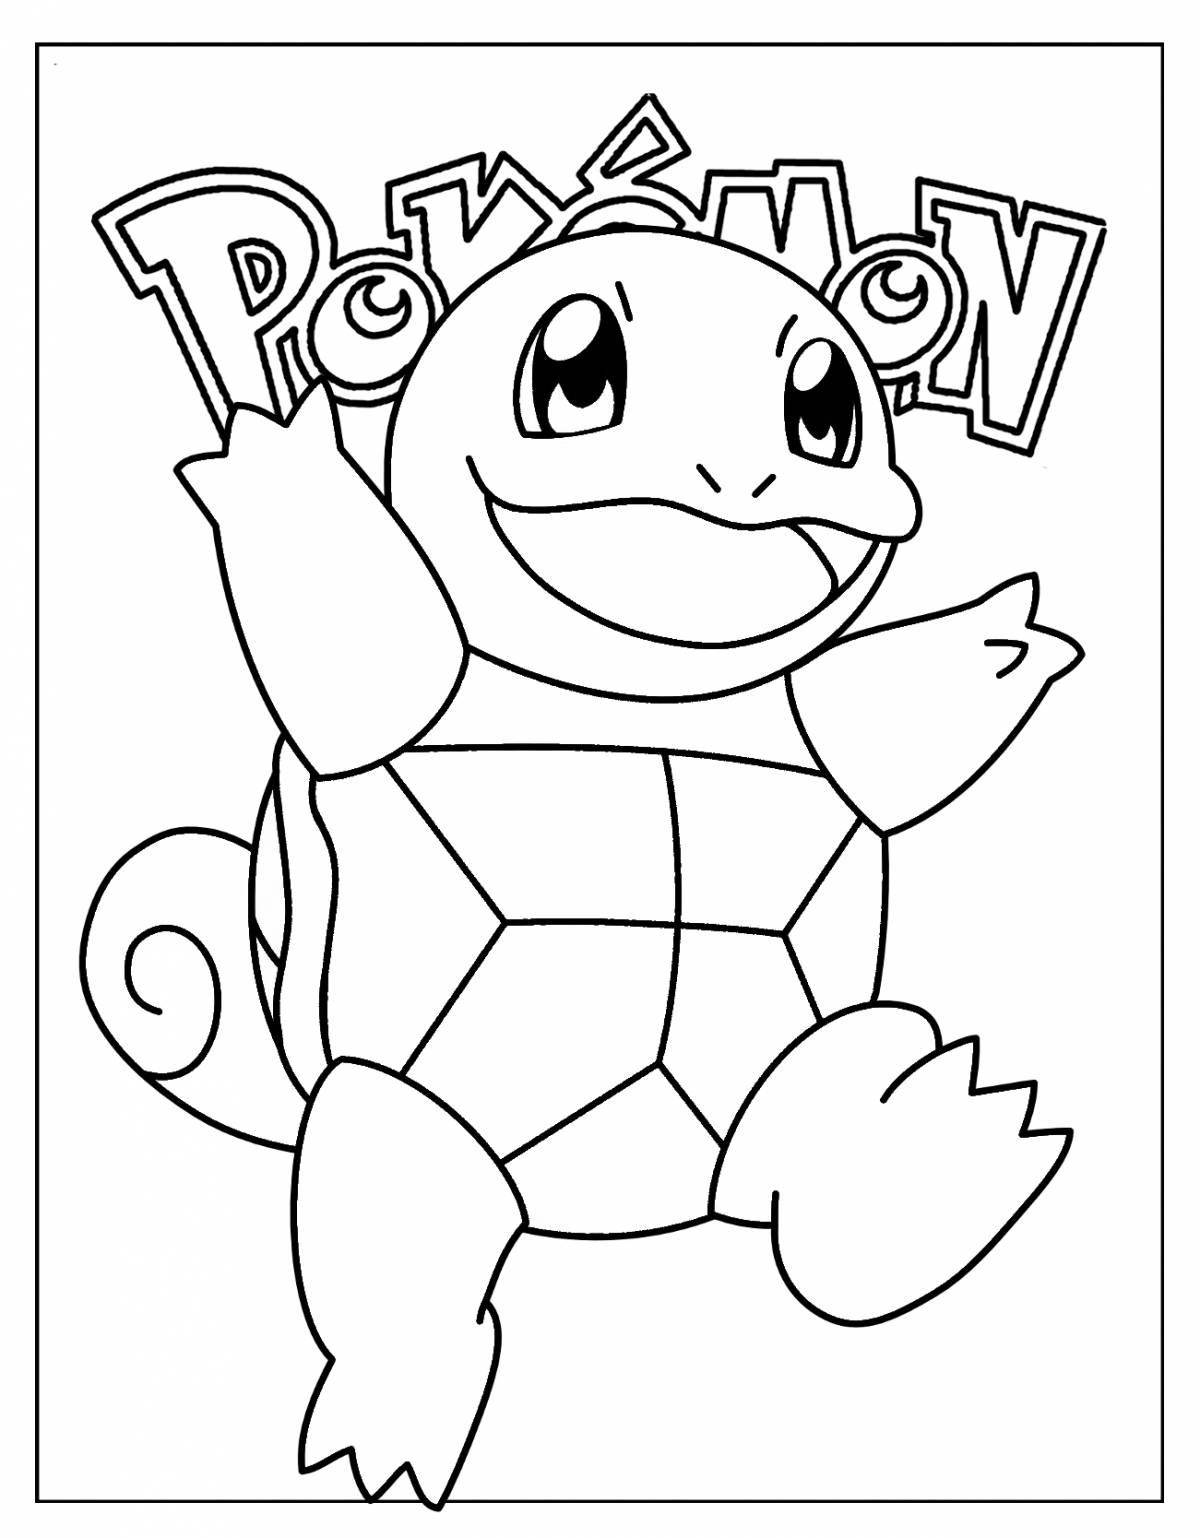 Lovely squirtle pokemon coloring page